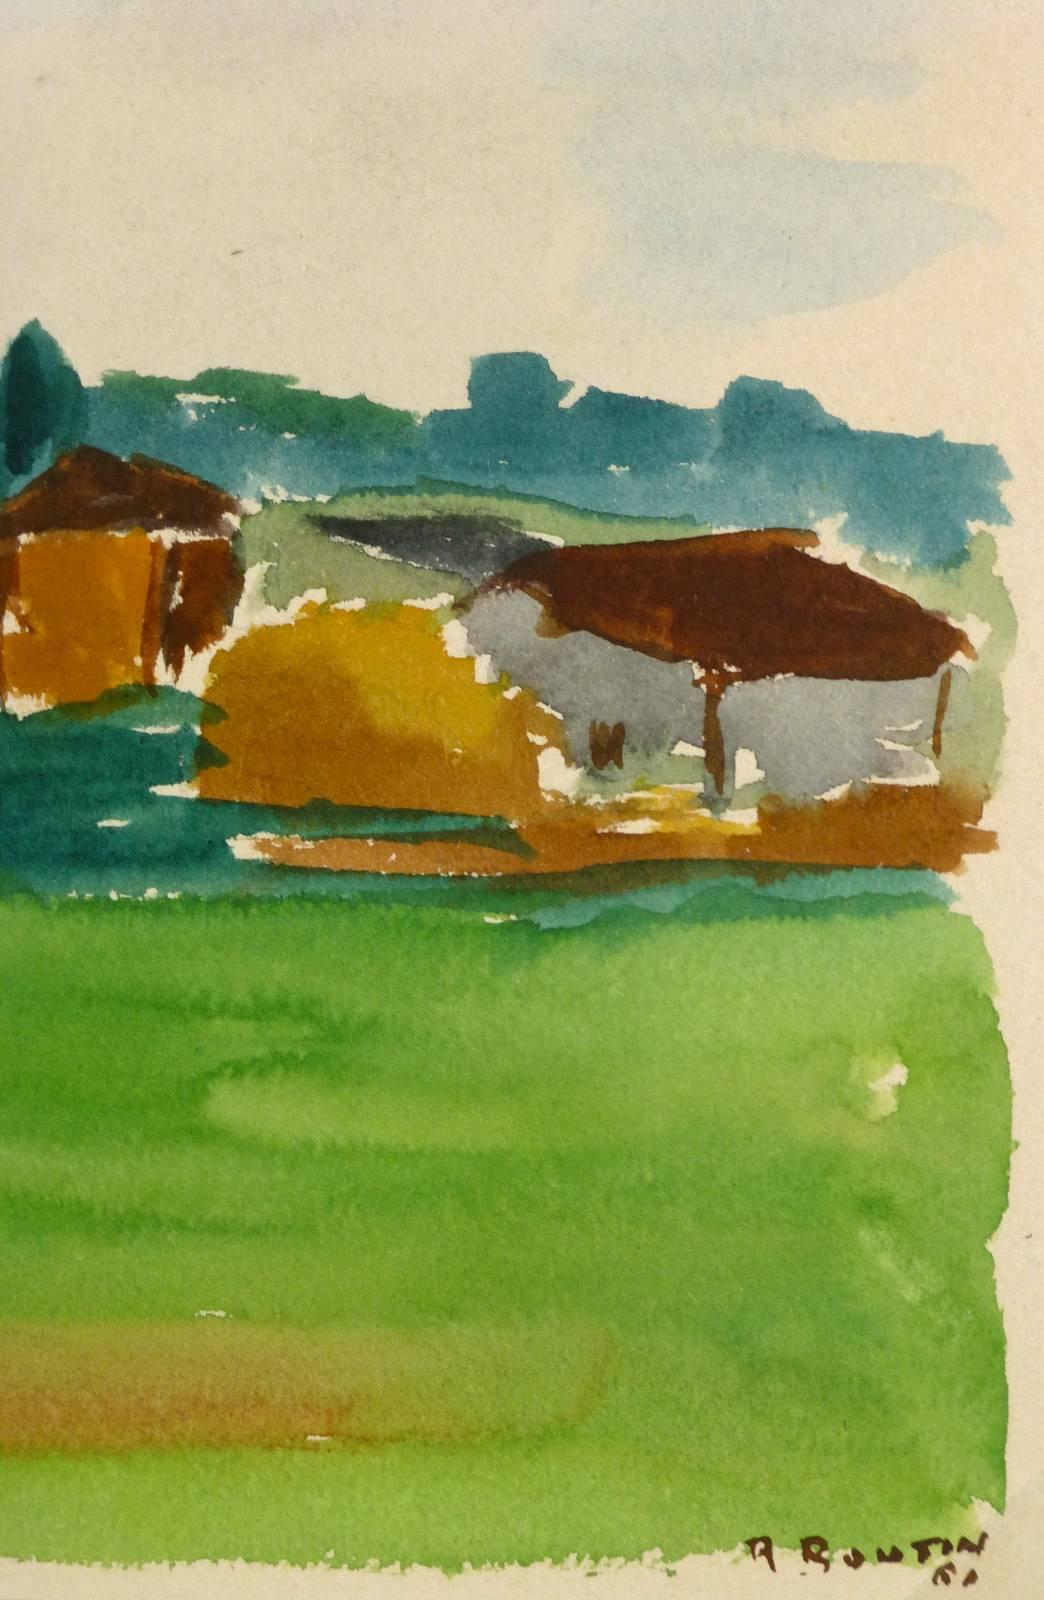 Landscape Watercolor - Green Pasture with Country Homes - Art by Unknown